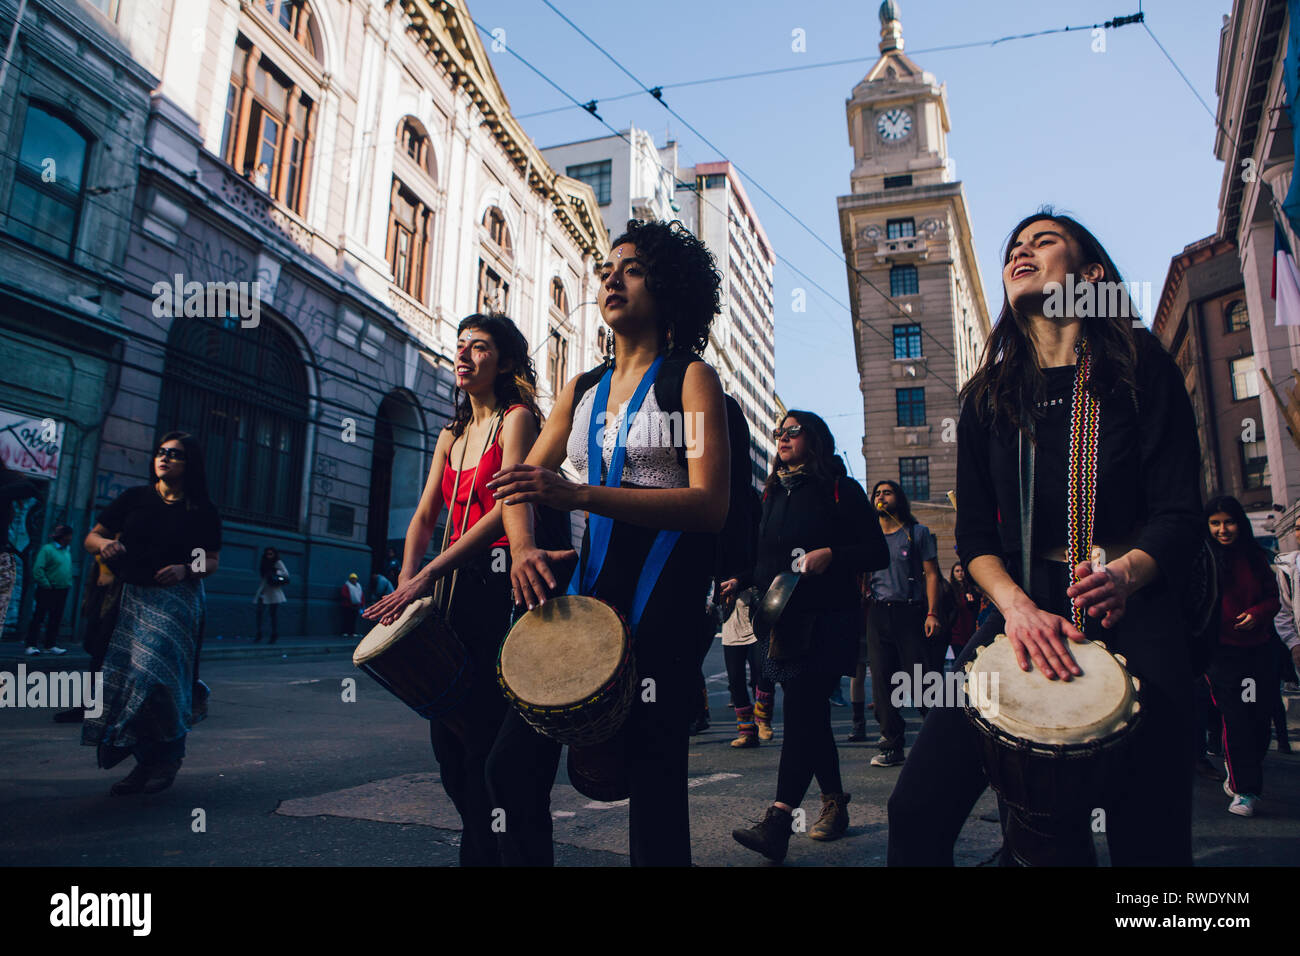 Valparaiso, Chile - June 01, 2018: Chileans marched through Valparaiso's streets, demanding an end to Sexism in the Education System. Stock Photo